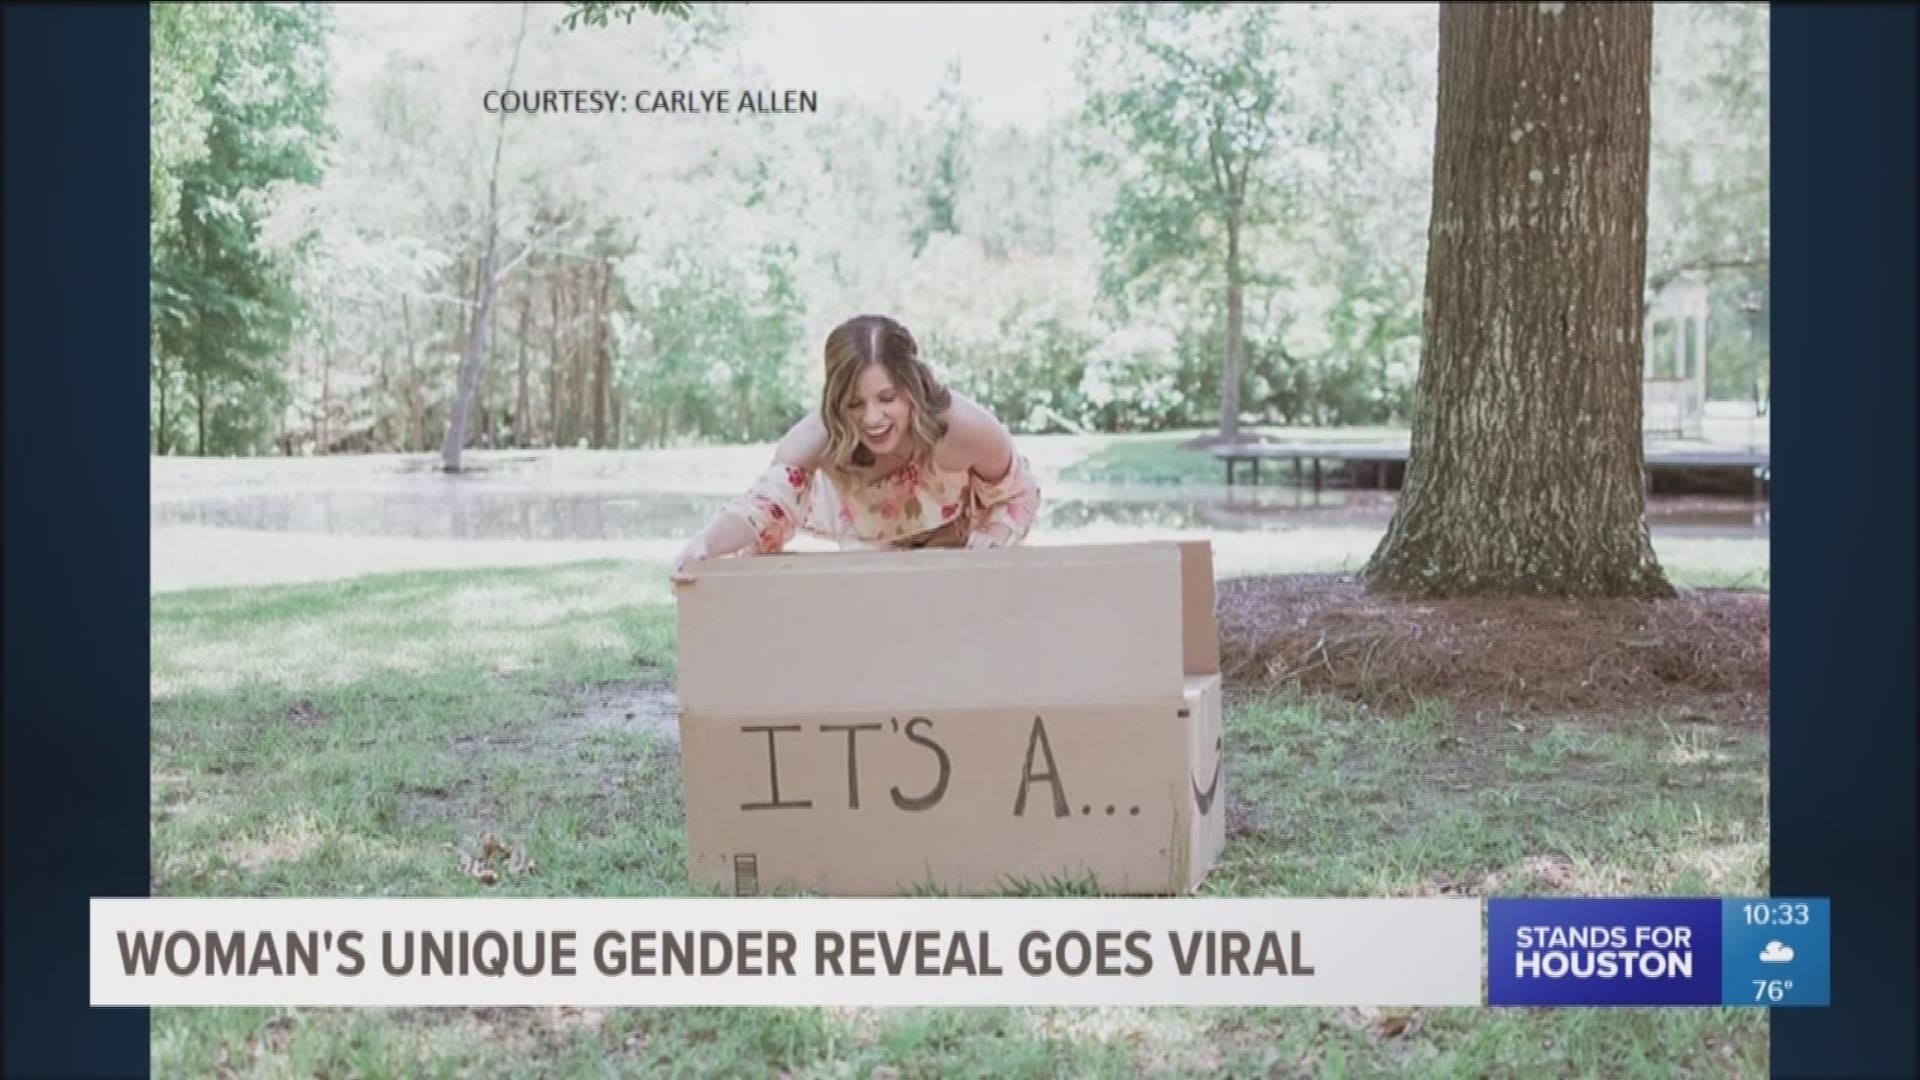 A Texas woman's gender reveal photo shoot has gone viral for one adorable reason.